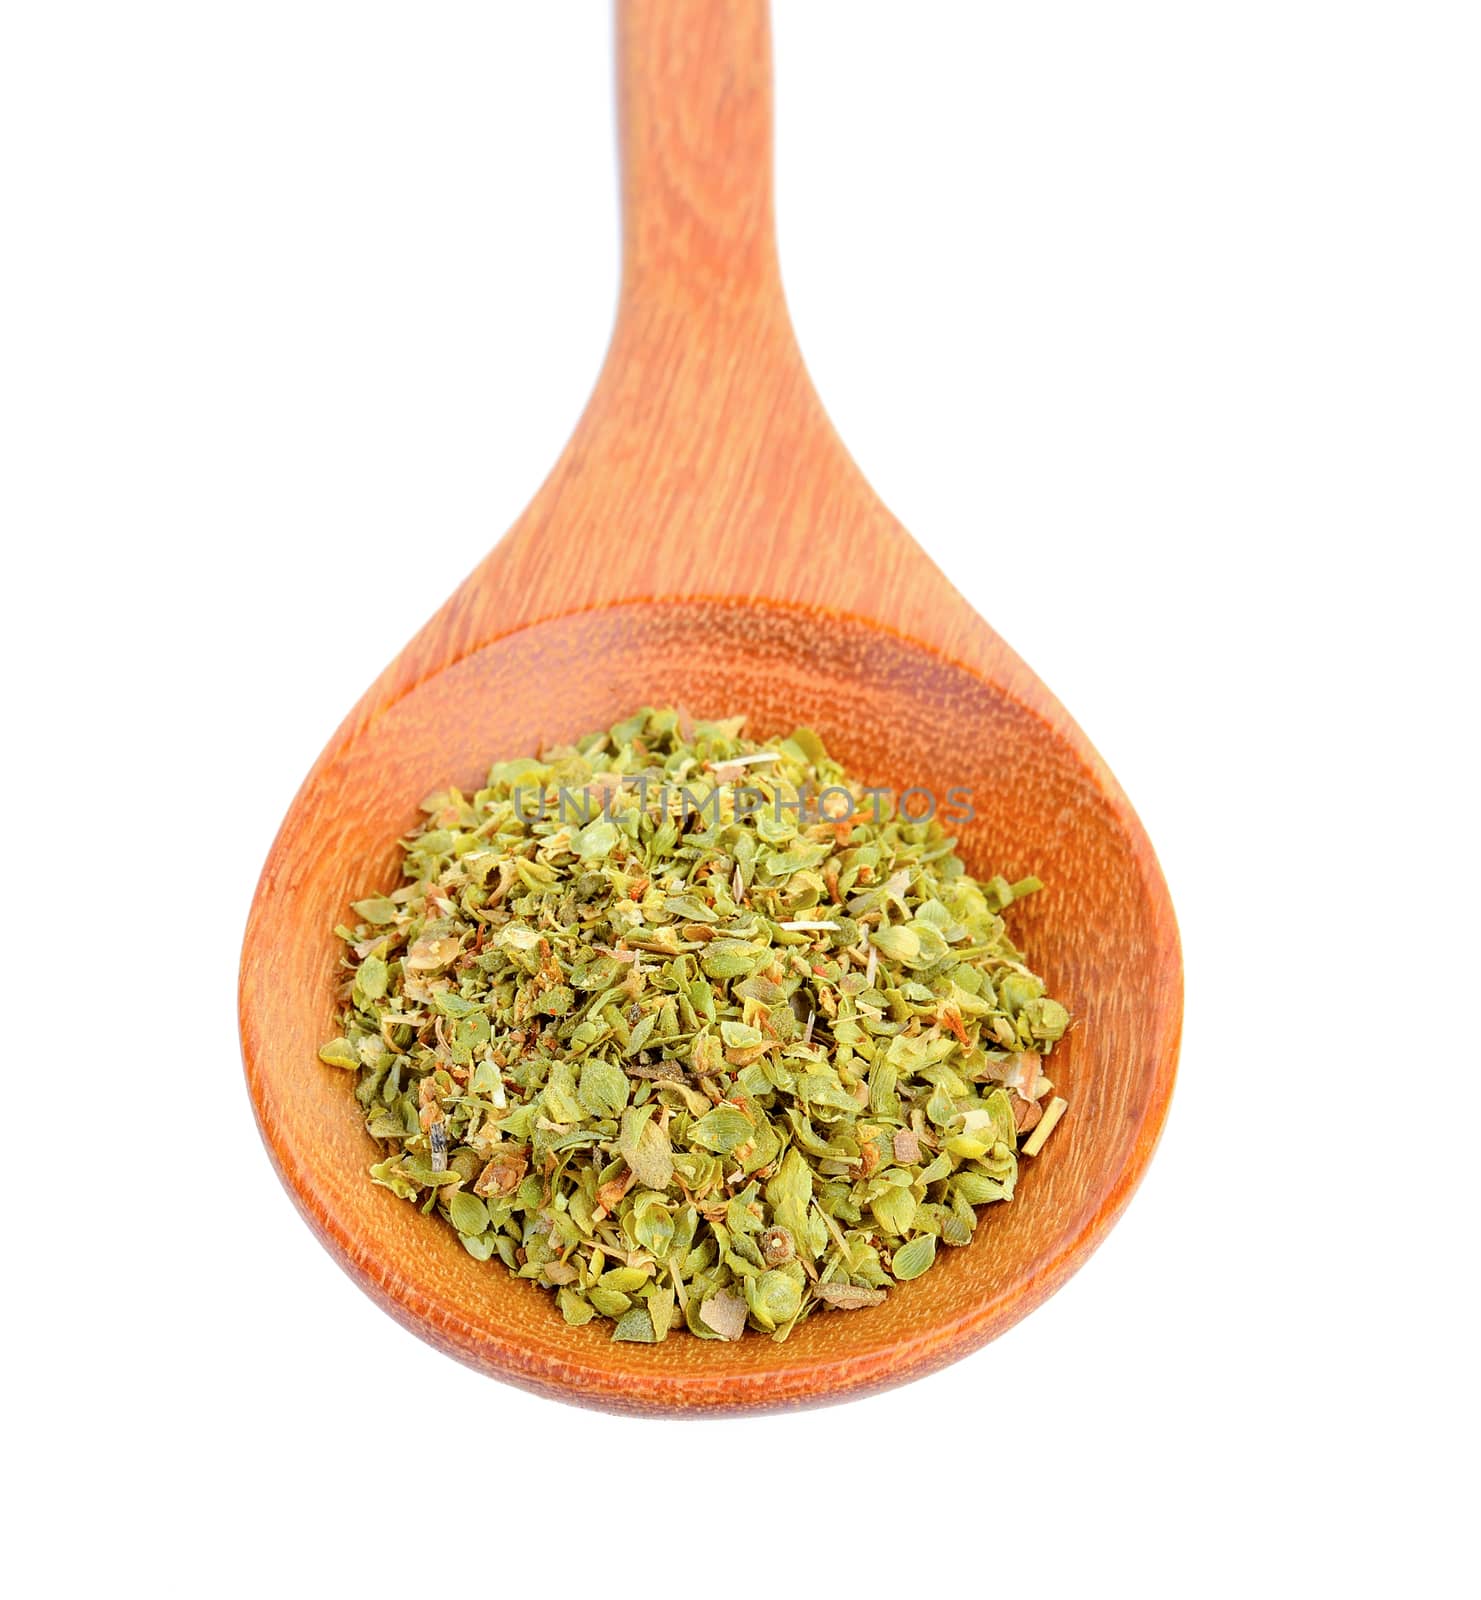 Dried Oregano in wood spoon on white background by sommai